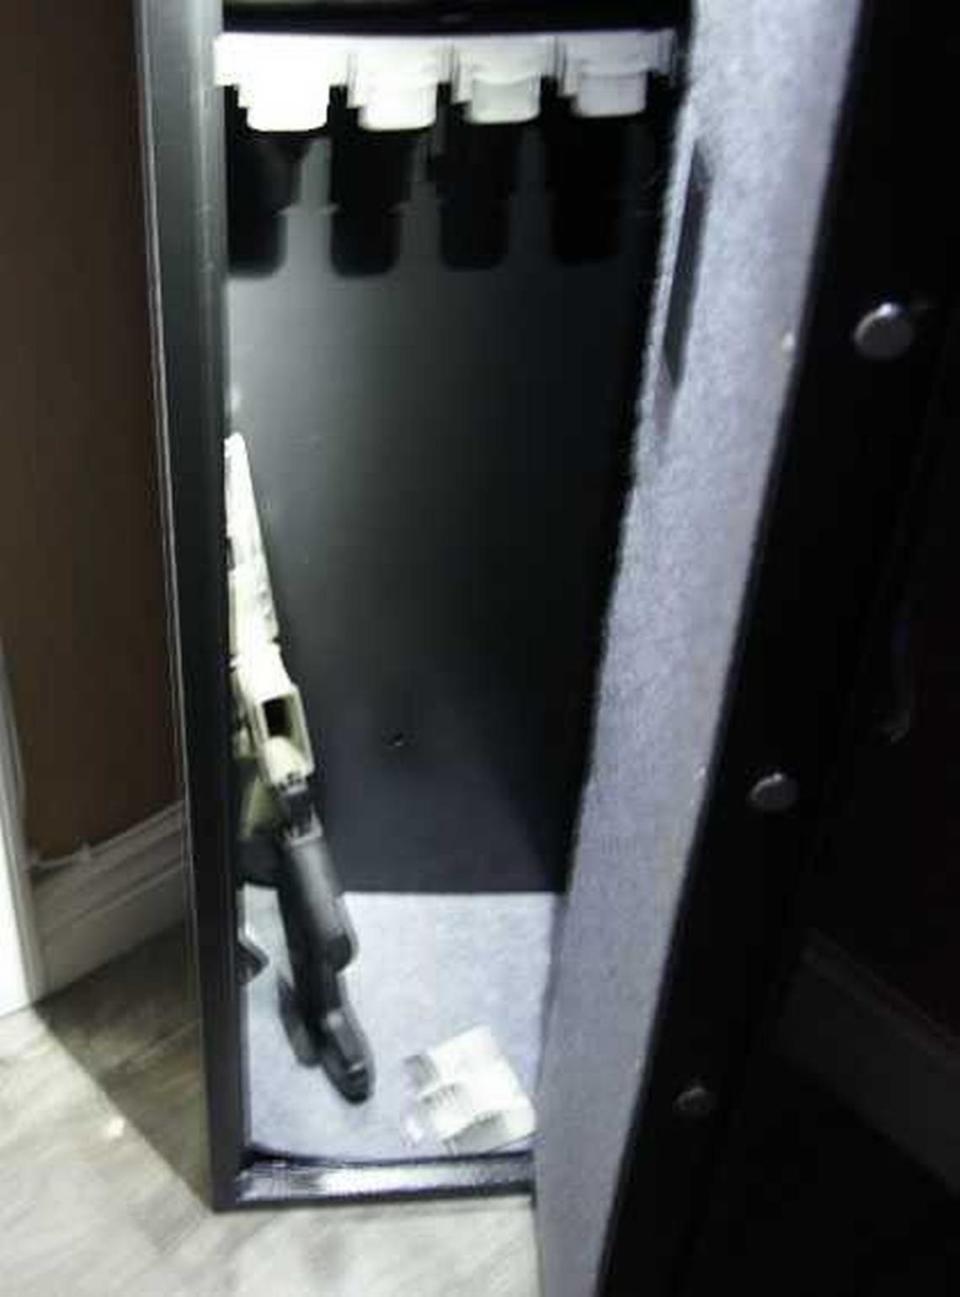 In an image included by federal prosecutors in a criminal complaint against Ruby Uribe, a non-serialized short-barreled rifle is seen in a safe inside Uribe’s home. The weapon was seized by federal authorities following a court-ordered search of her Antelope home.